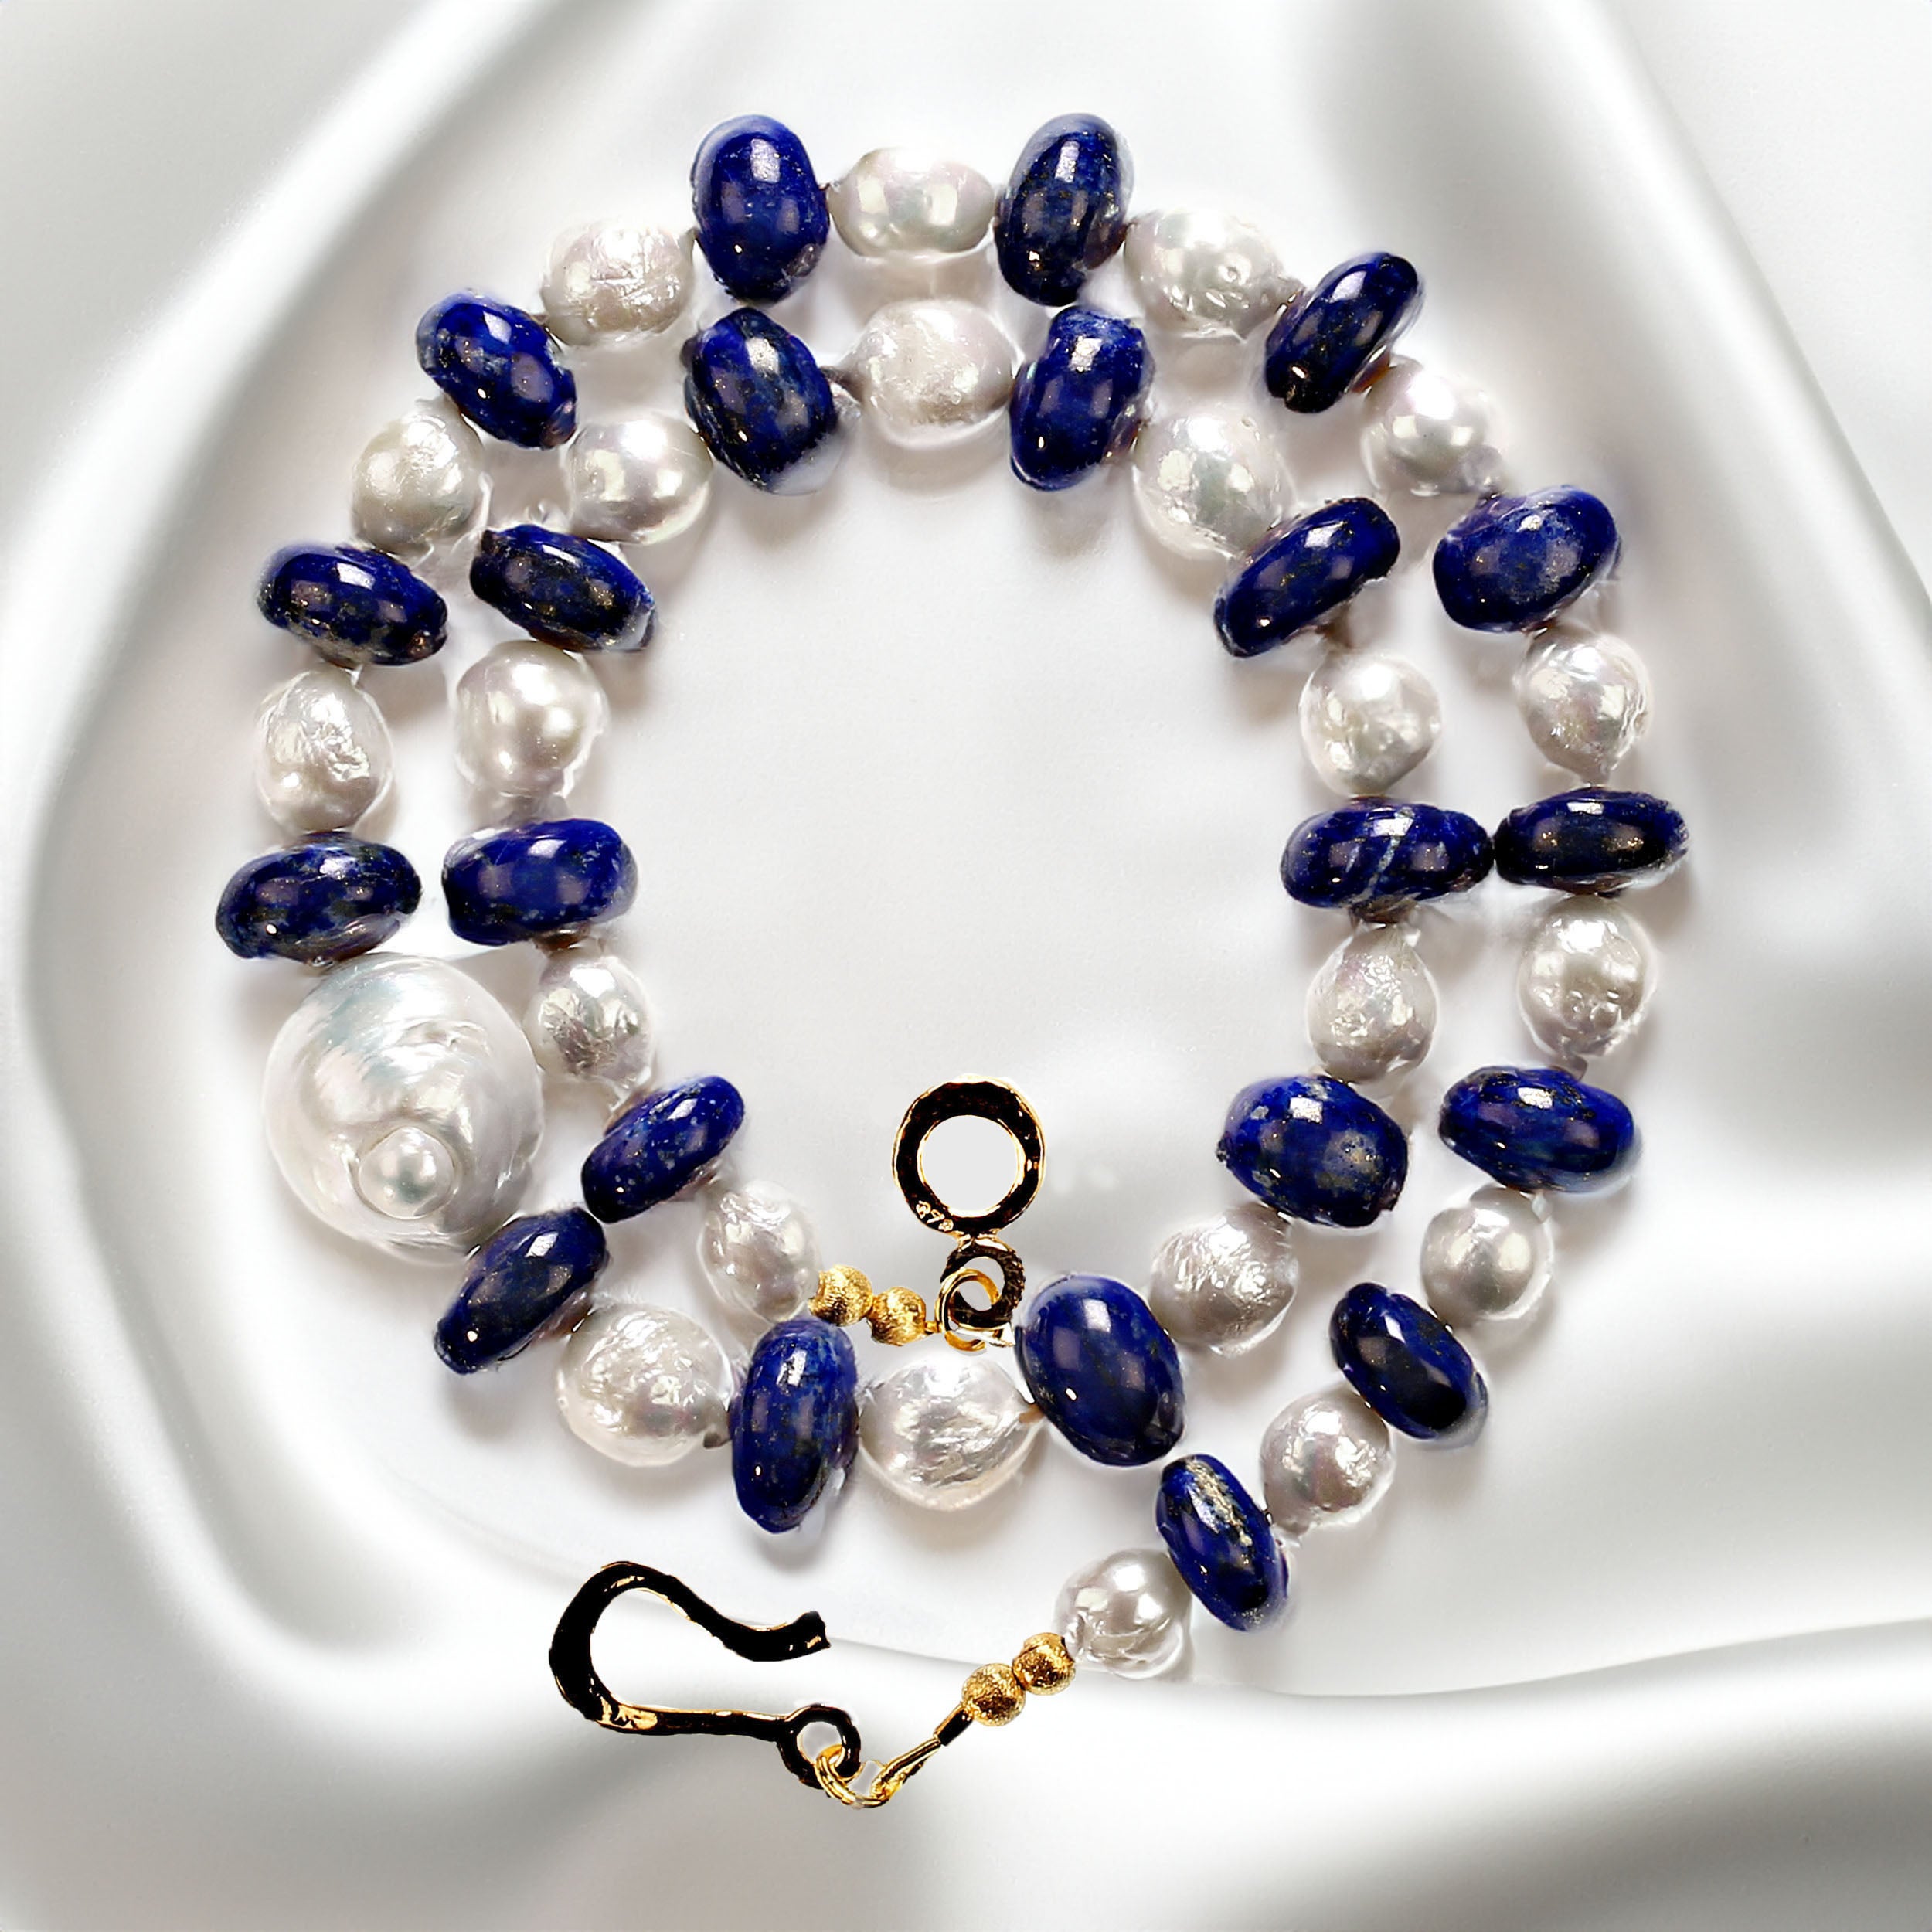 20 Inch stunning lapis lazuli and white pearl necklace.  The lapis is smooth and fashioned in thick rondelles, and just slightly graduated.  The central pearl focal is absolutely gorgeous.  It is 20x18mm and flashes pinks and greens. The necklace is